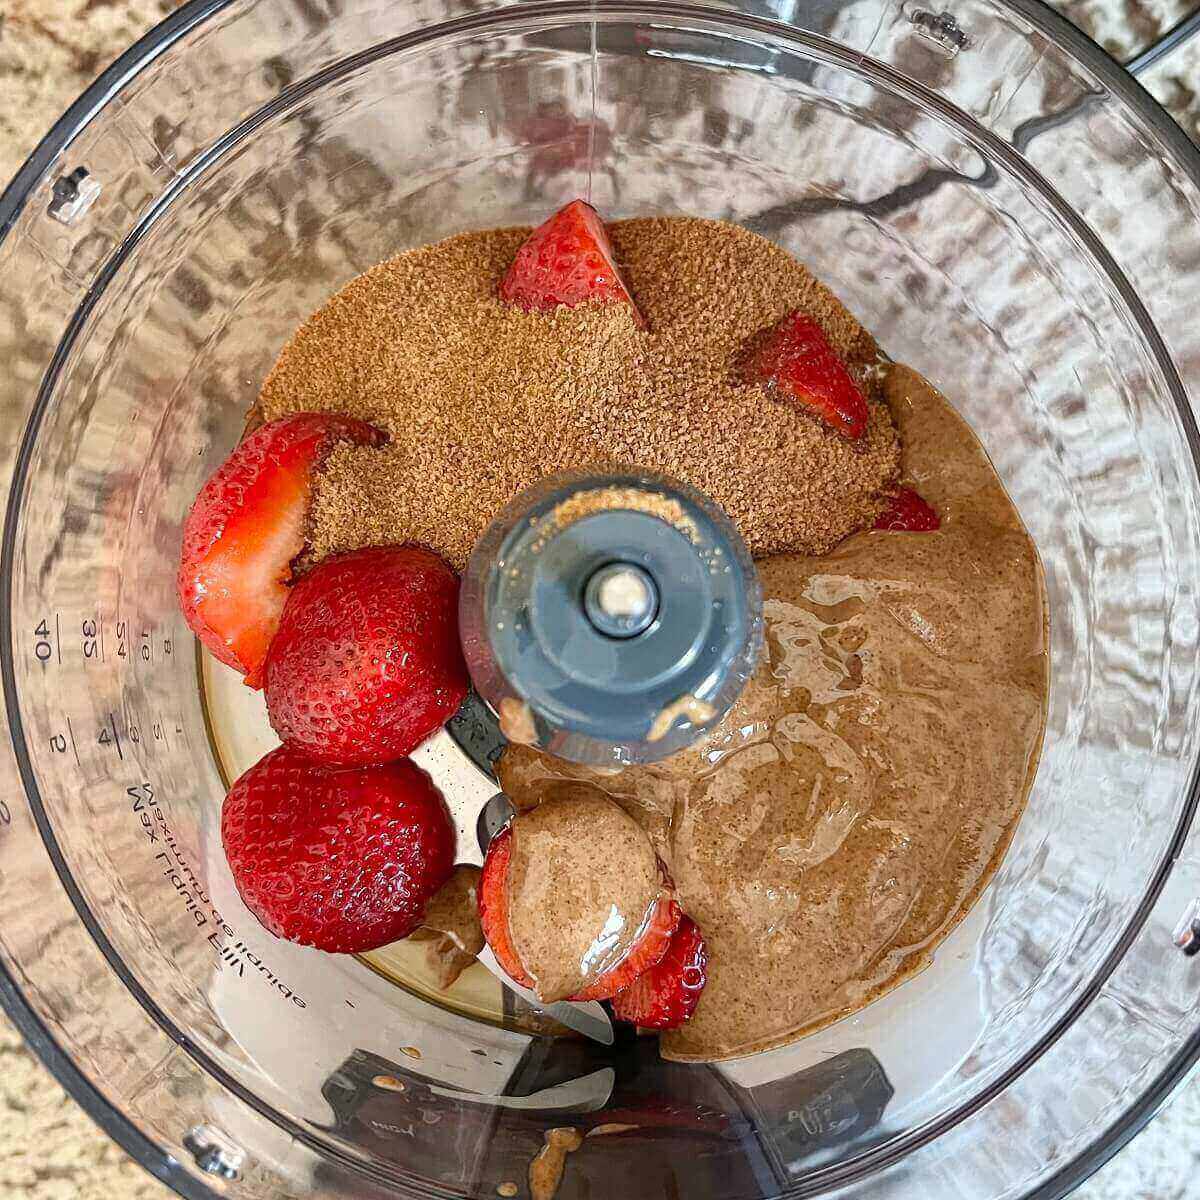 Ingredients for strawberry cookies in a food processor.